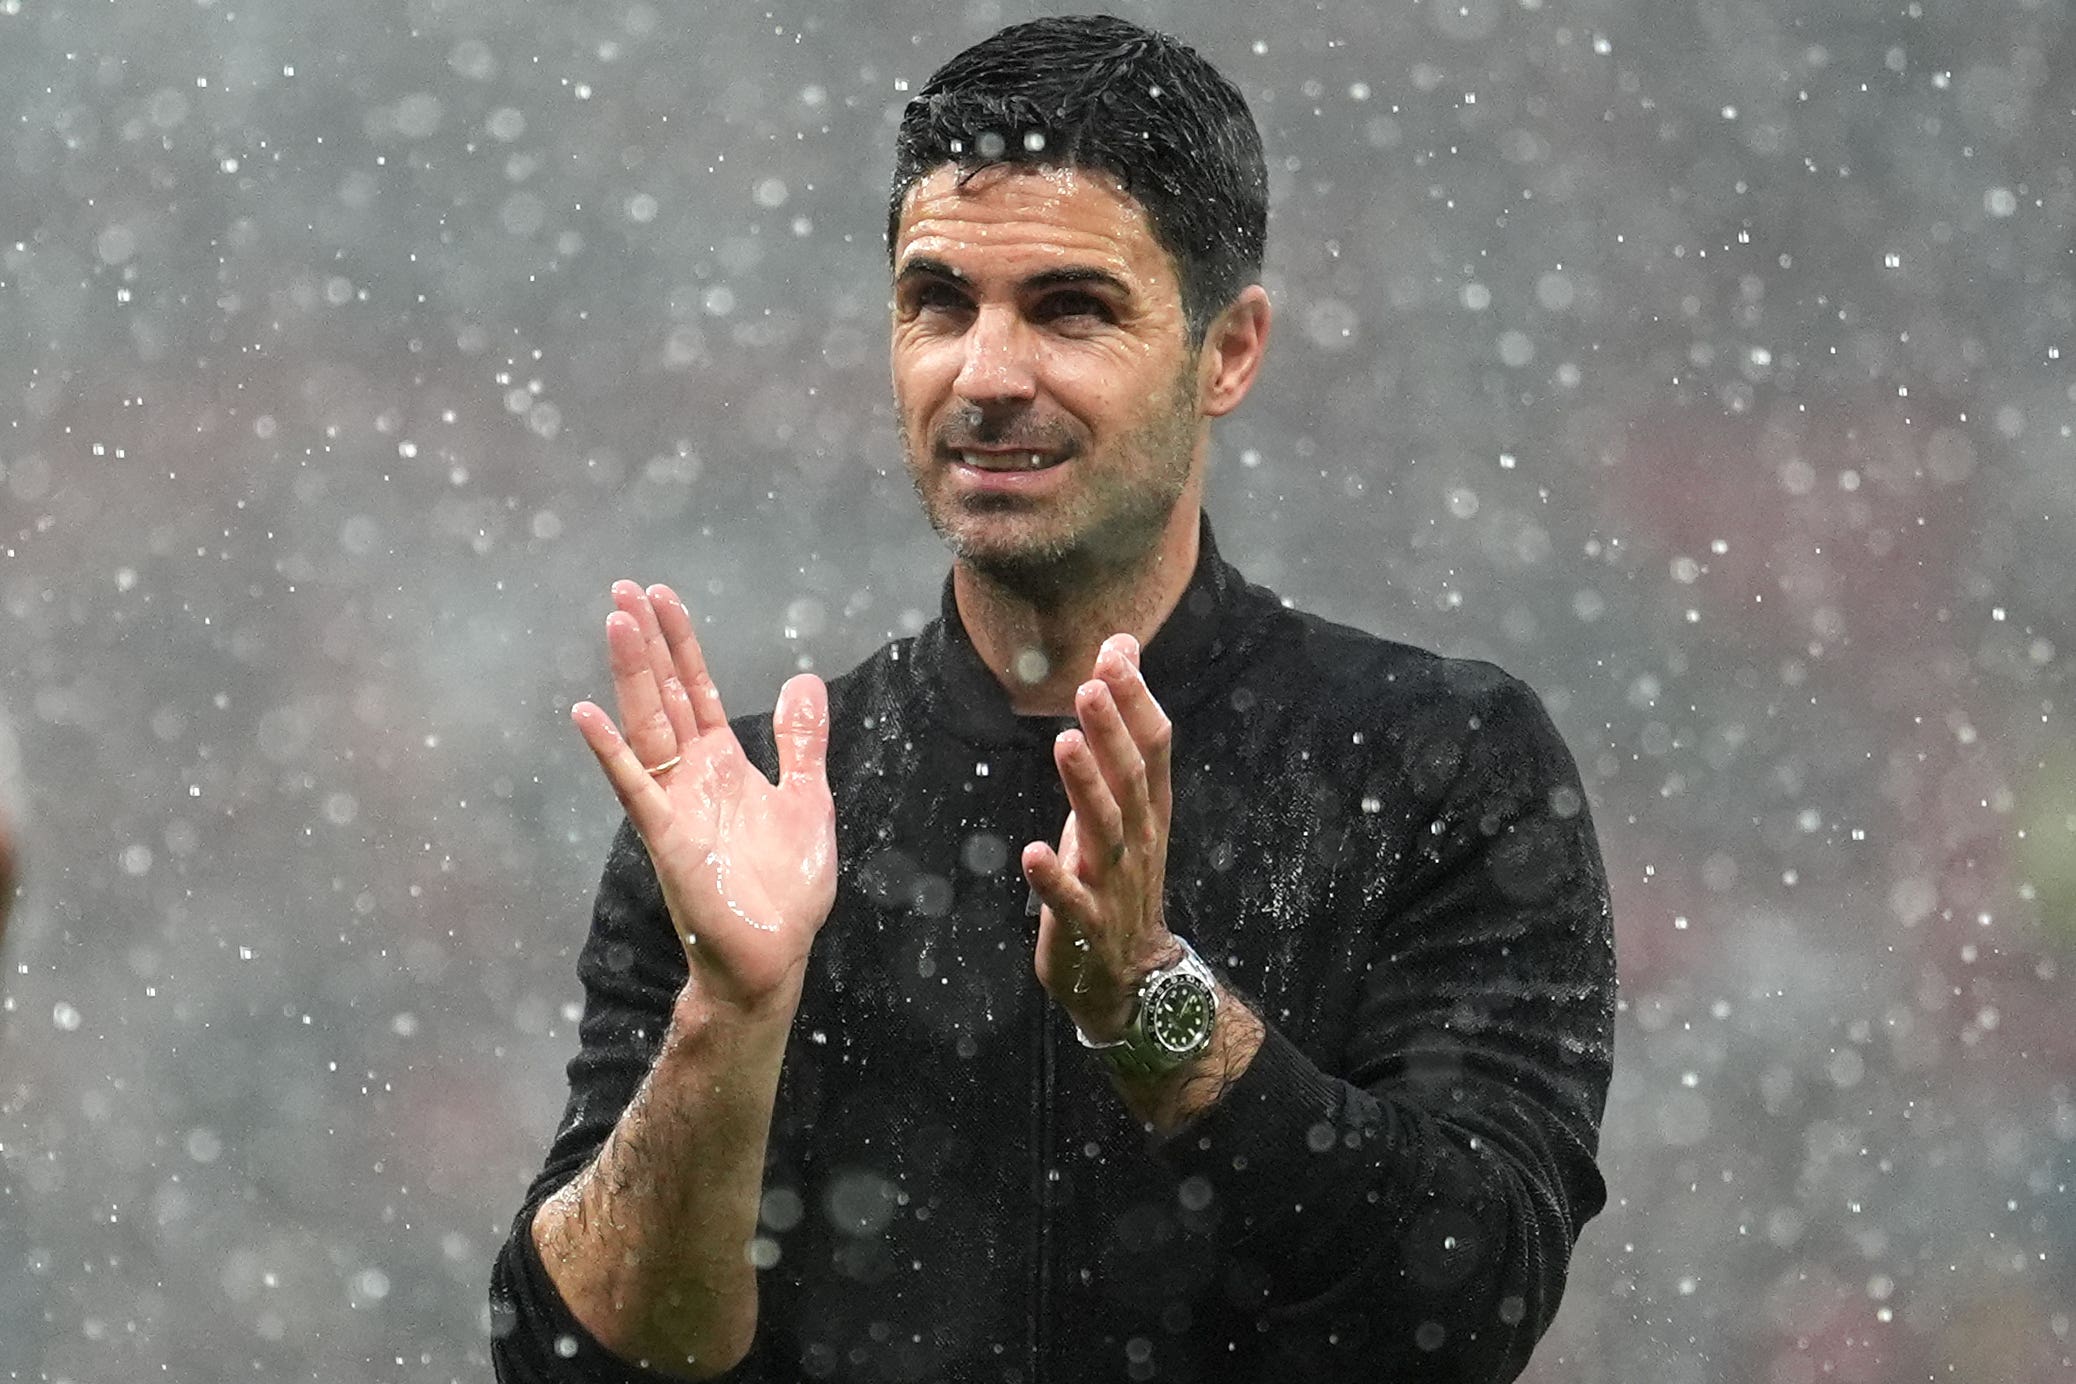 mikel arteta, manchester city, premier league, the absurd truth behind arsenal’s title challenge and why mikel arteta has already overachieved